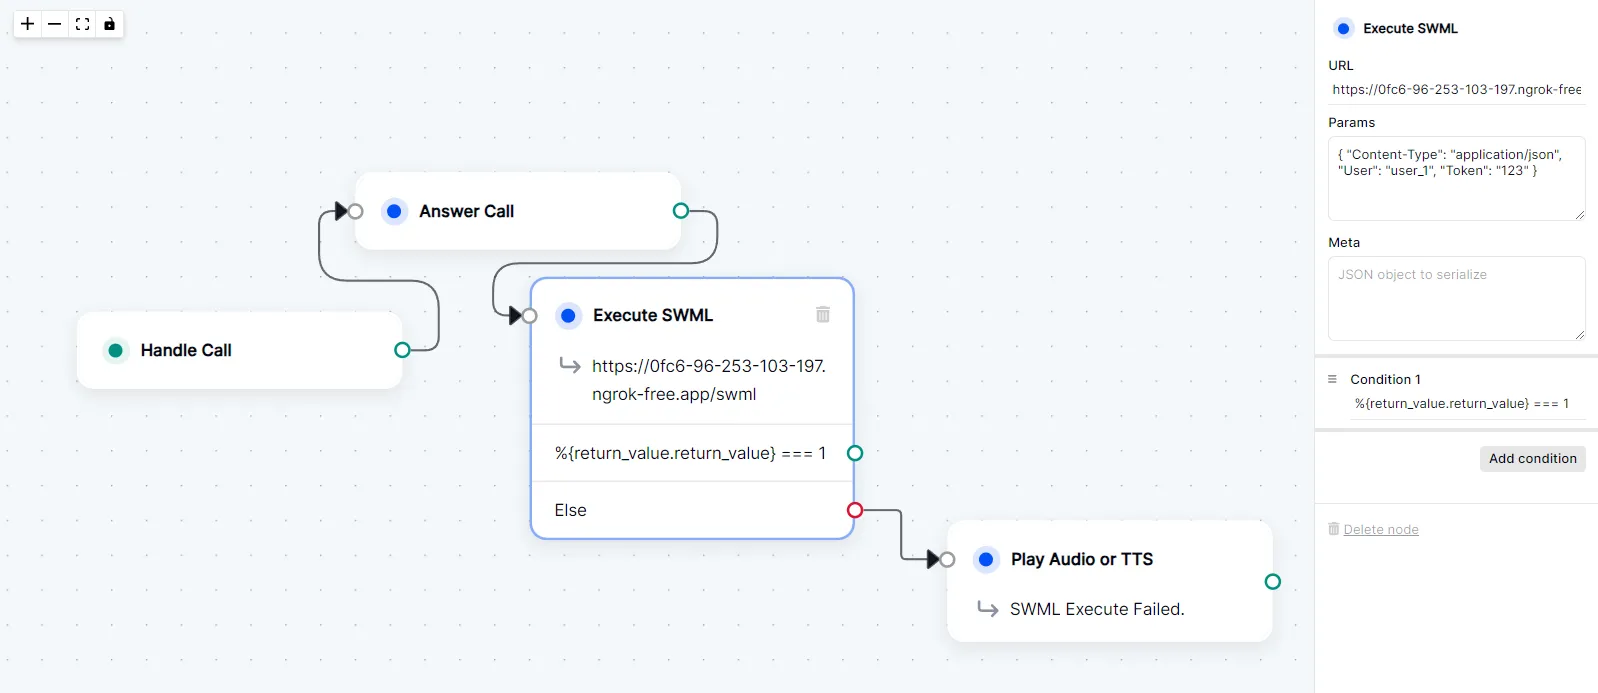 Execute SWML node example that executes a remote SWML document.